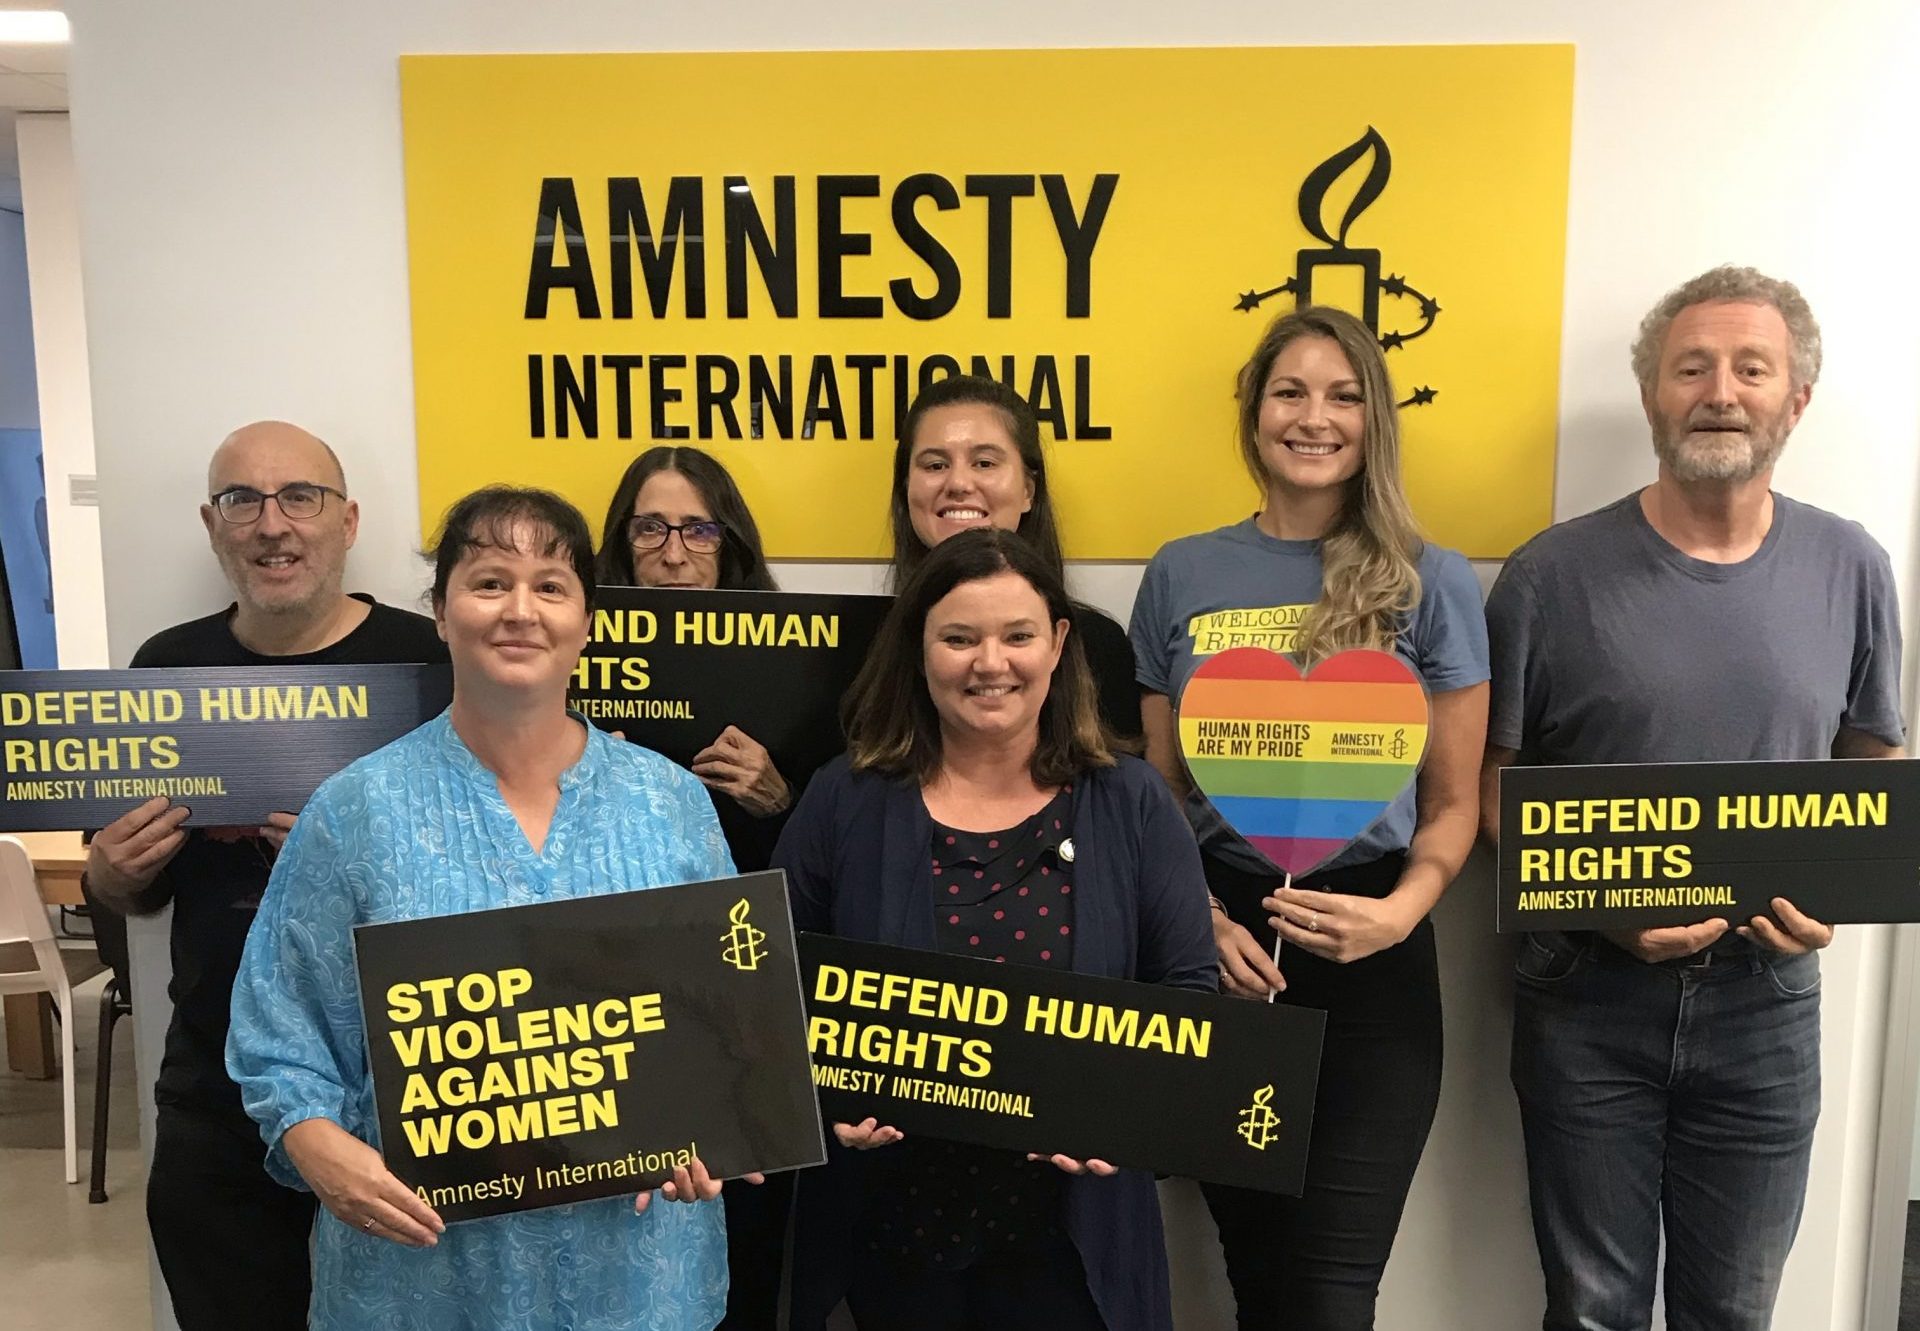 7 people holding signs saying Defend Human Rights standing in front of a yellow Amnesty International Sign